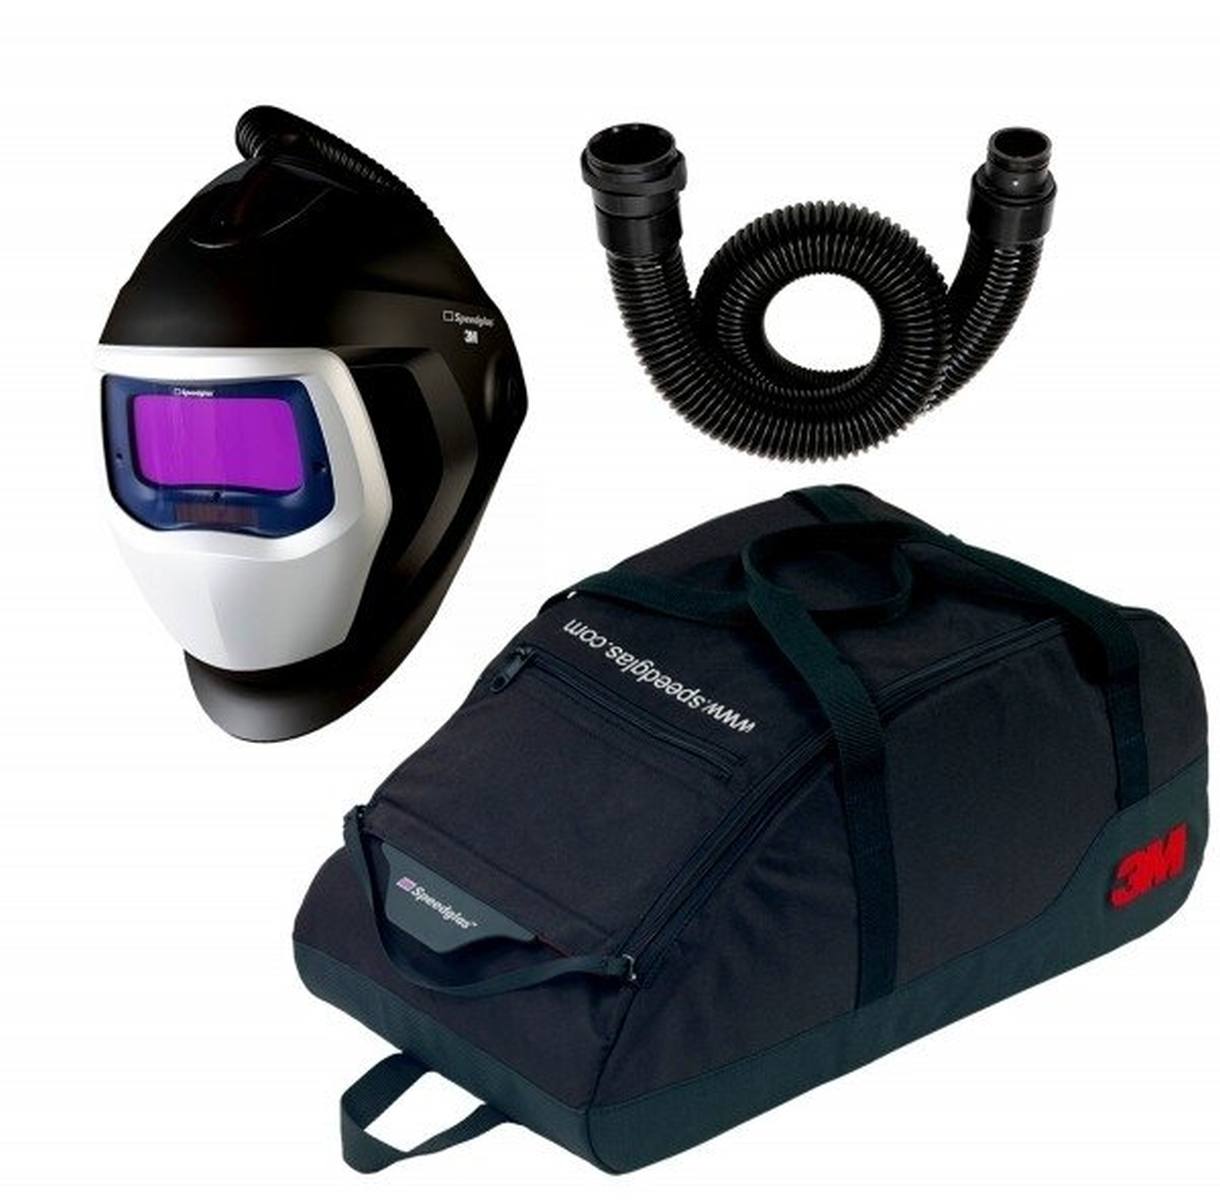 3M Speedglas 9100 Air welding mask with 9100XX ADF, incl. air hose, incl. storage bag 79 01 01 - TH2 upgrade kit #569025